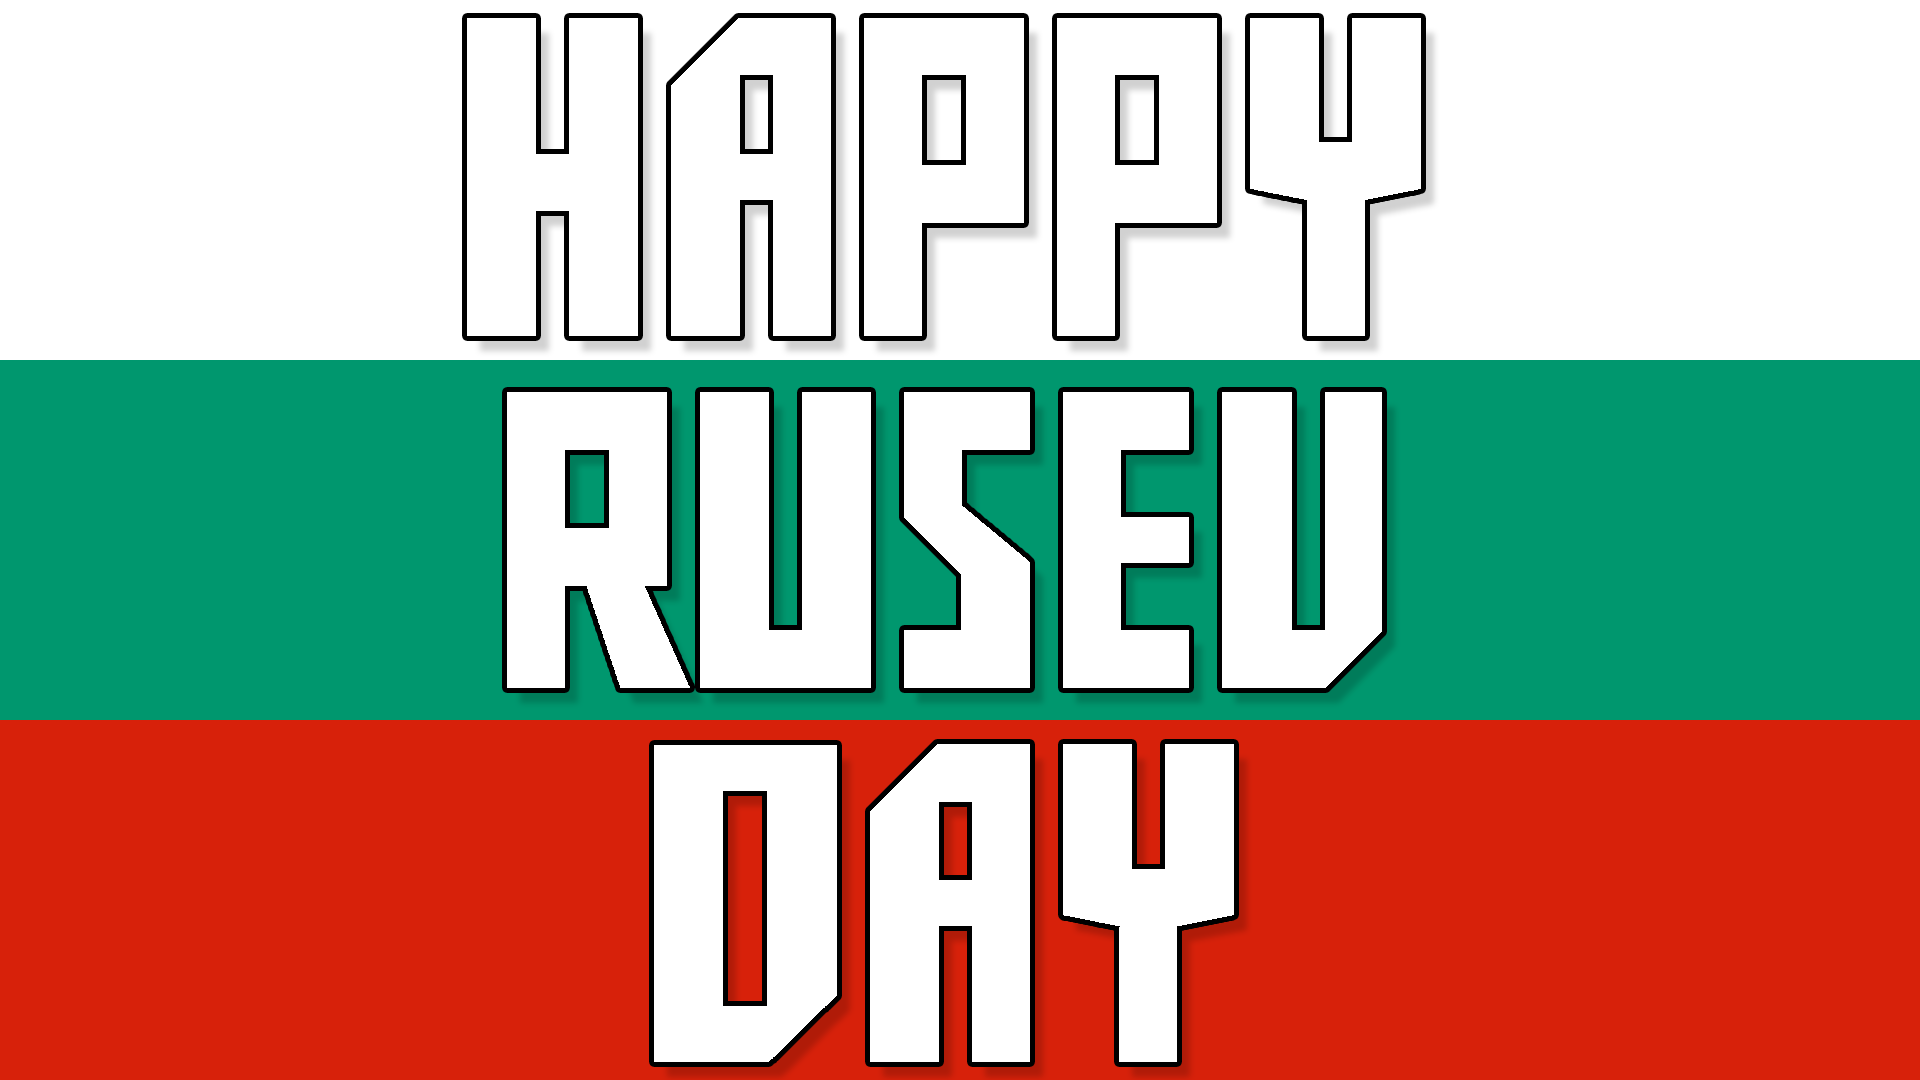 Rusev Logo - Couldn't find any good Happy Rusev Day wallpaper so I made some